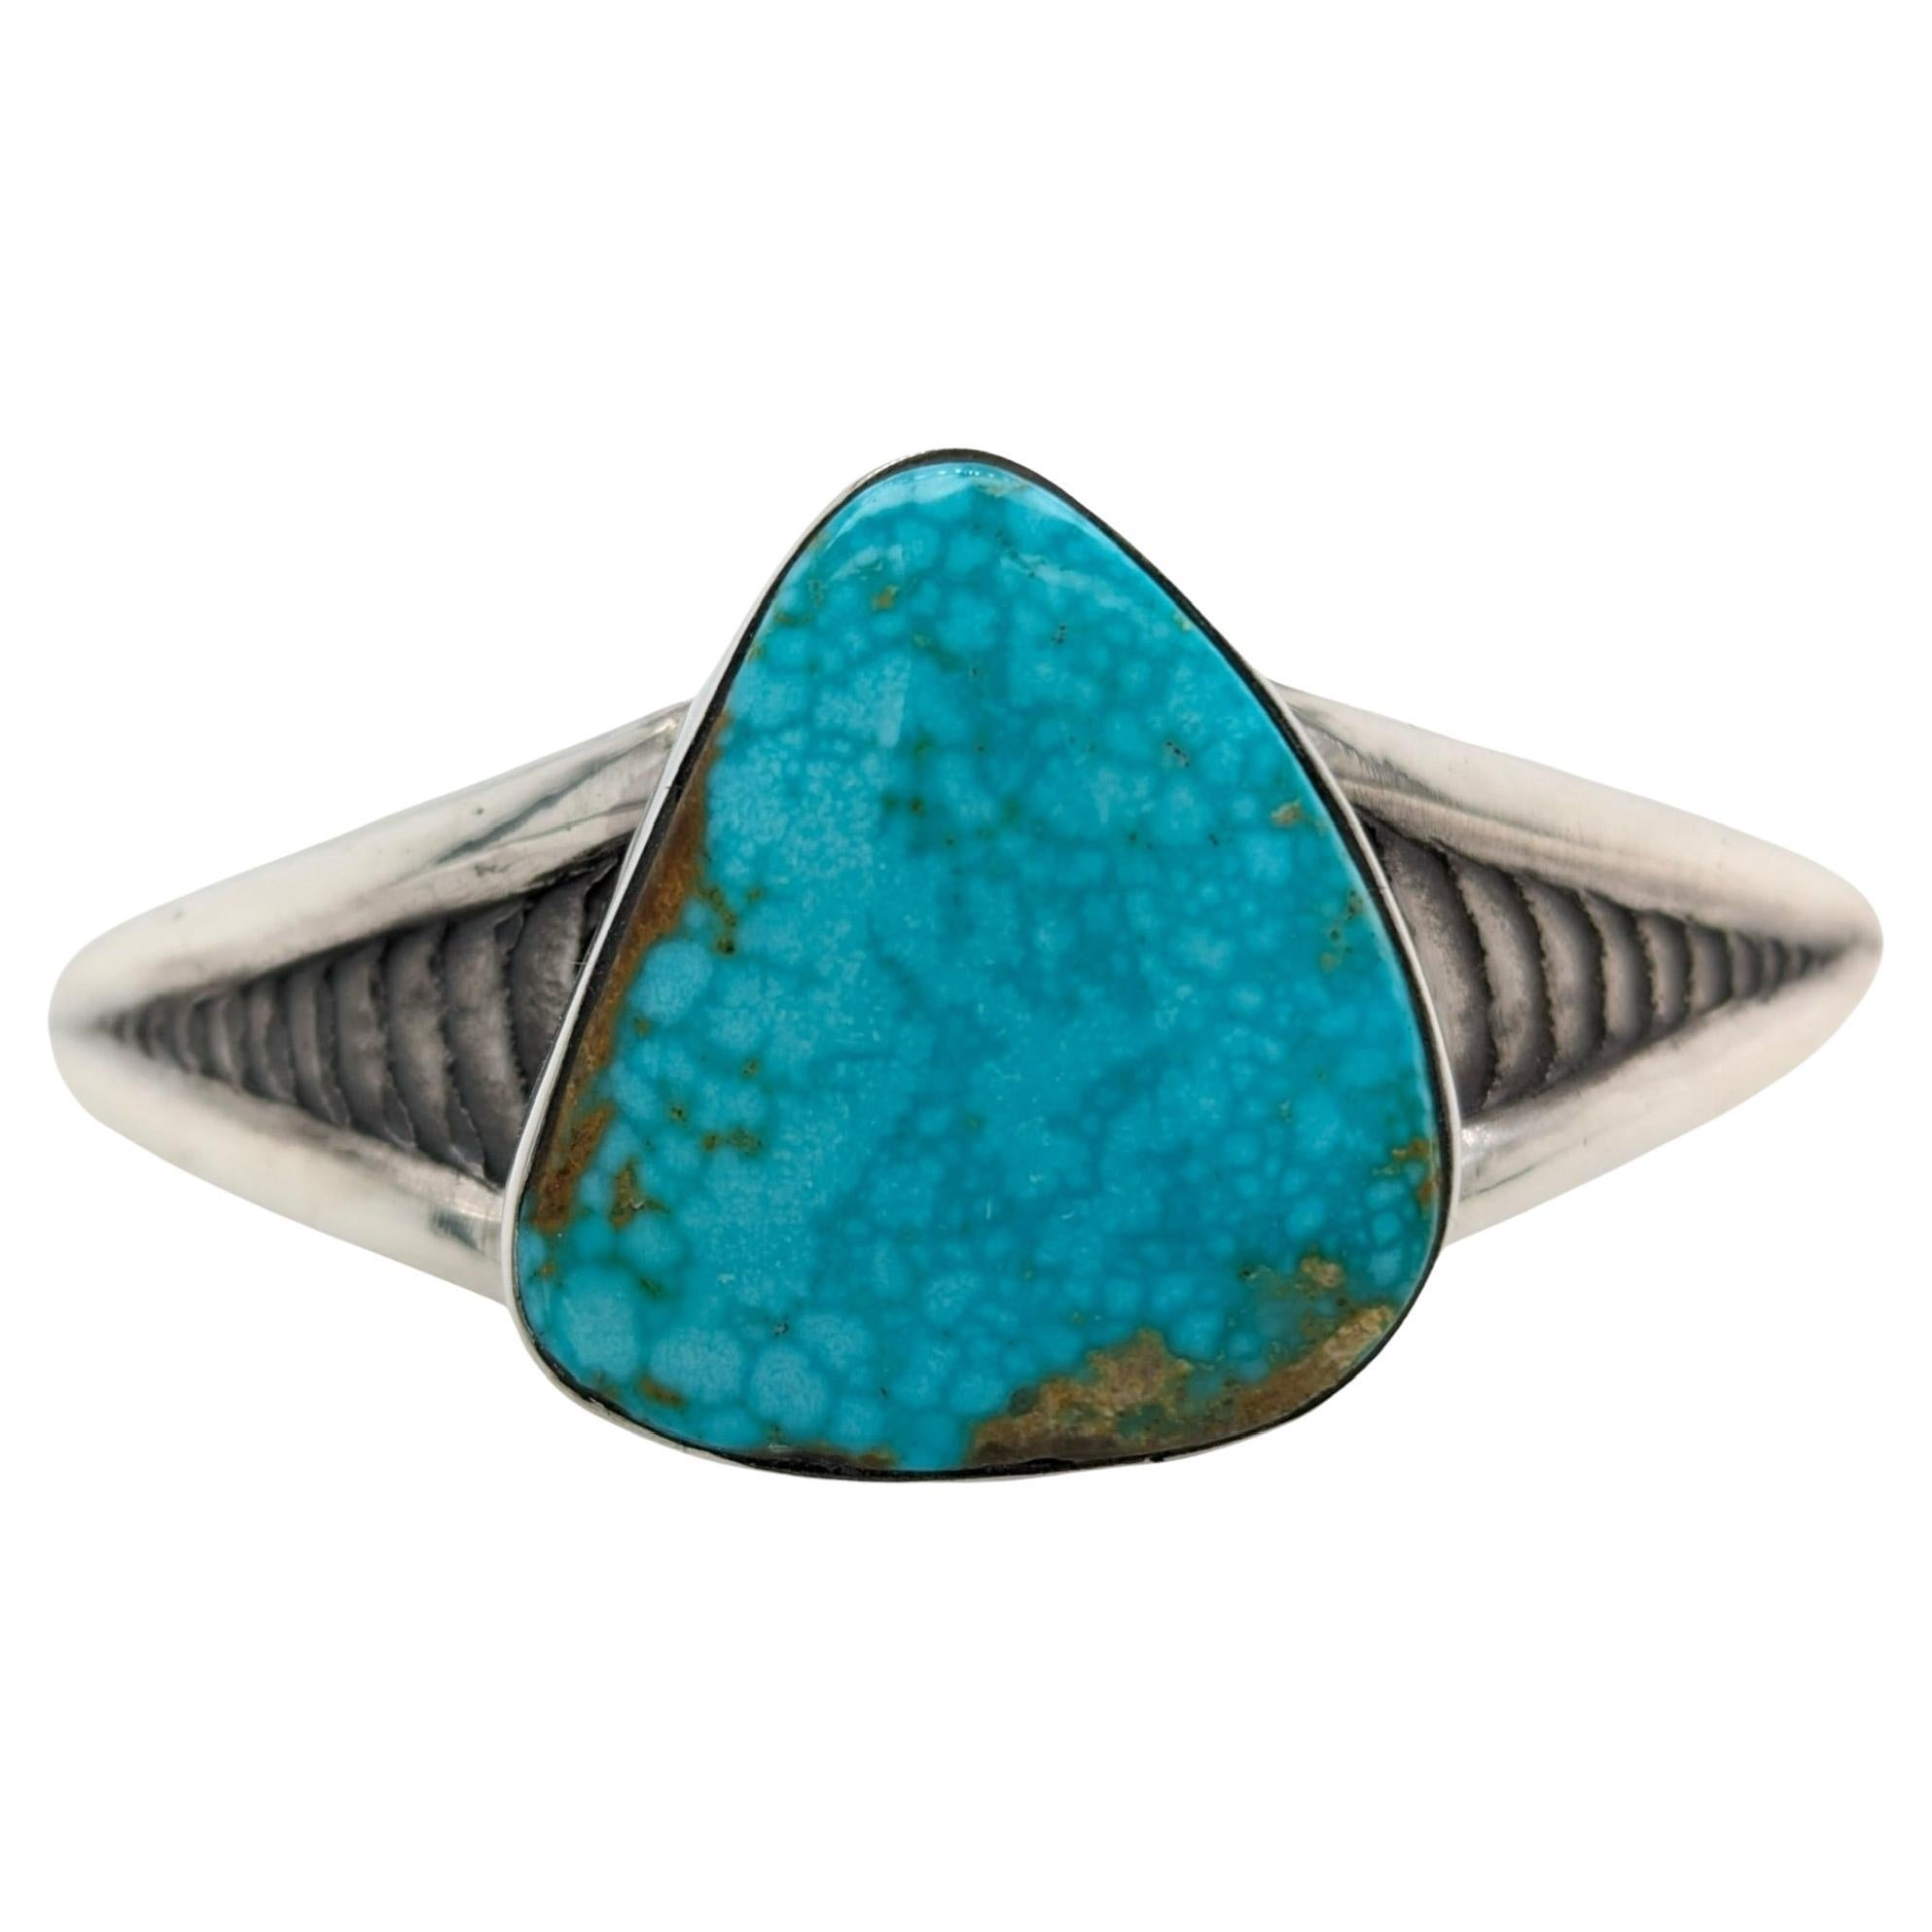 Striking Kingman Turquoise Cuff: Cuttle Bone Texture (Sterling Silver) For Sale